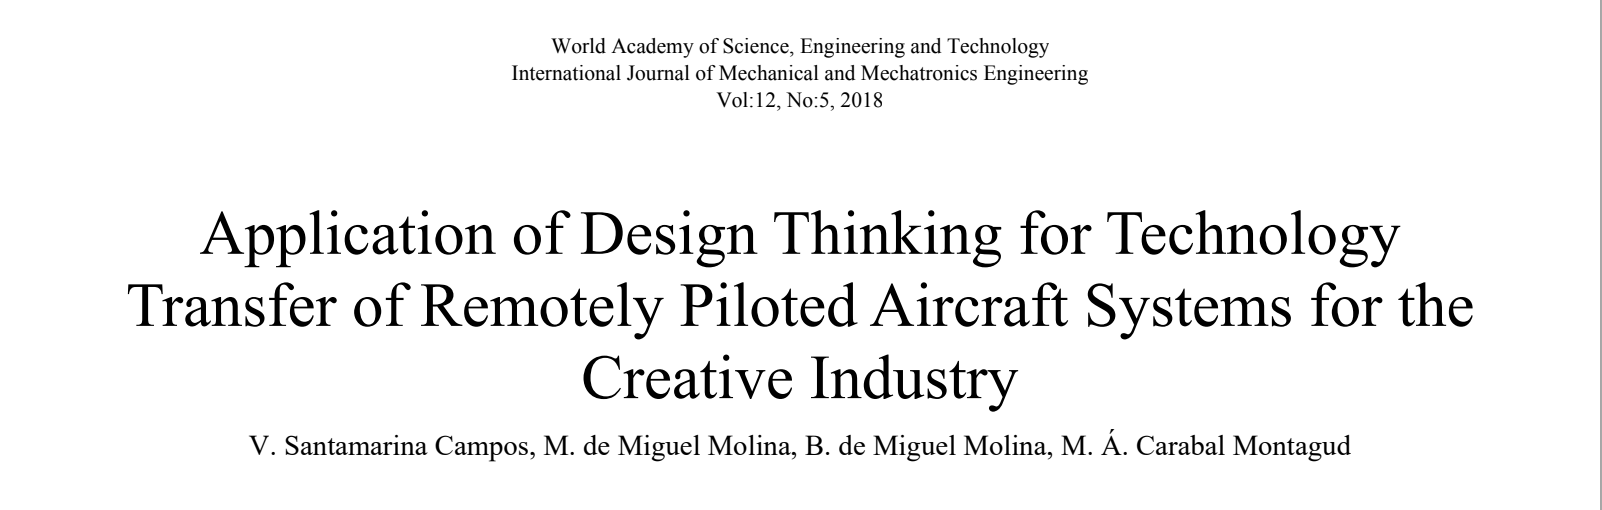 AiRT project in International Journal of Mechanical and Mechatronics Engineering